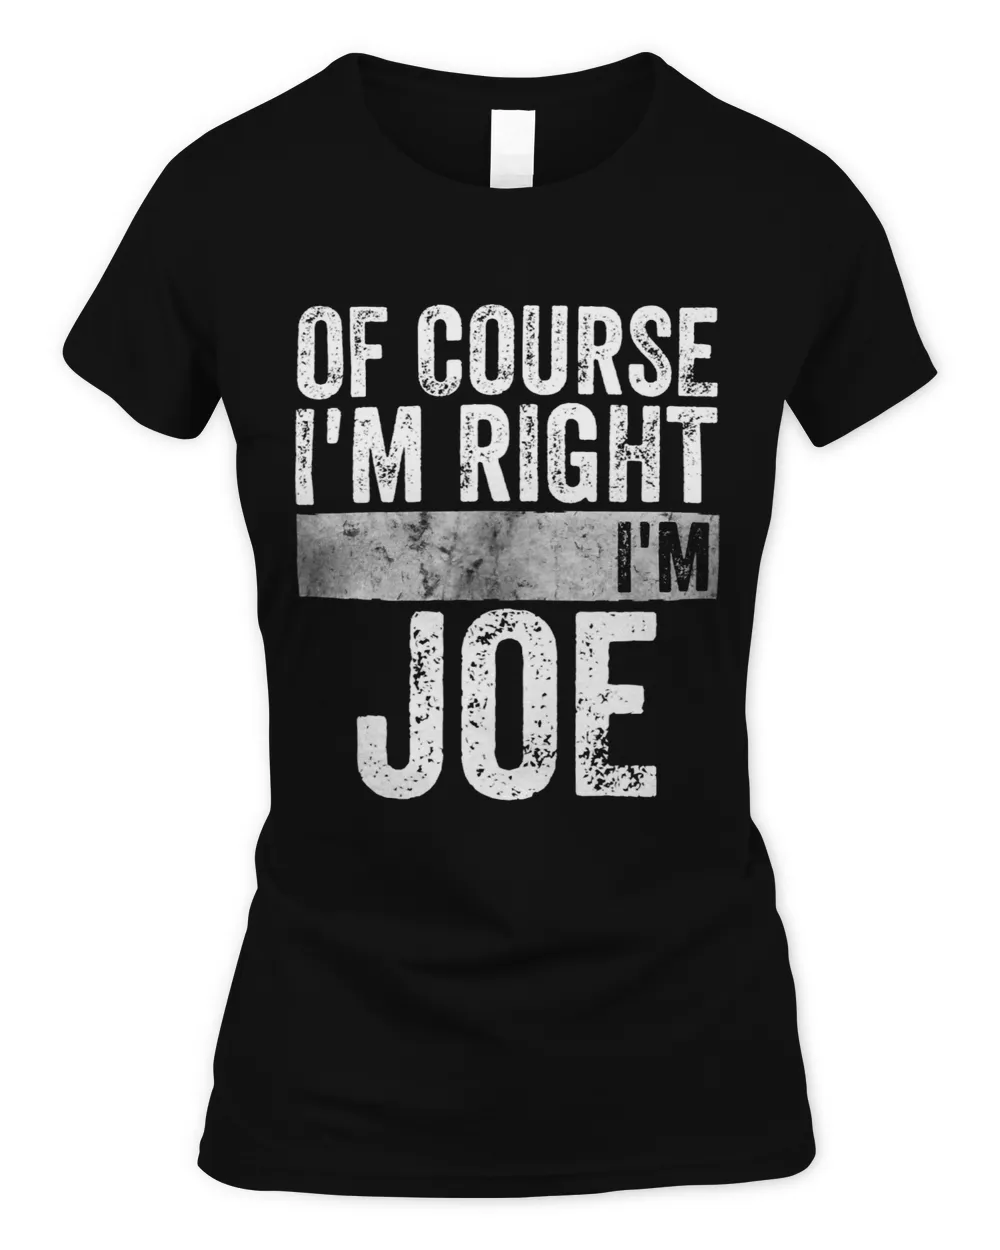 Funny Personalized Name Shirt Of Course Im Right Im Joe